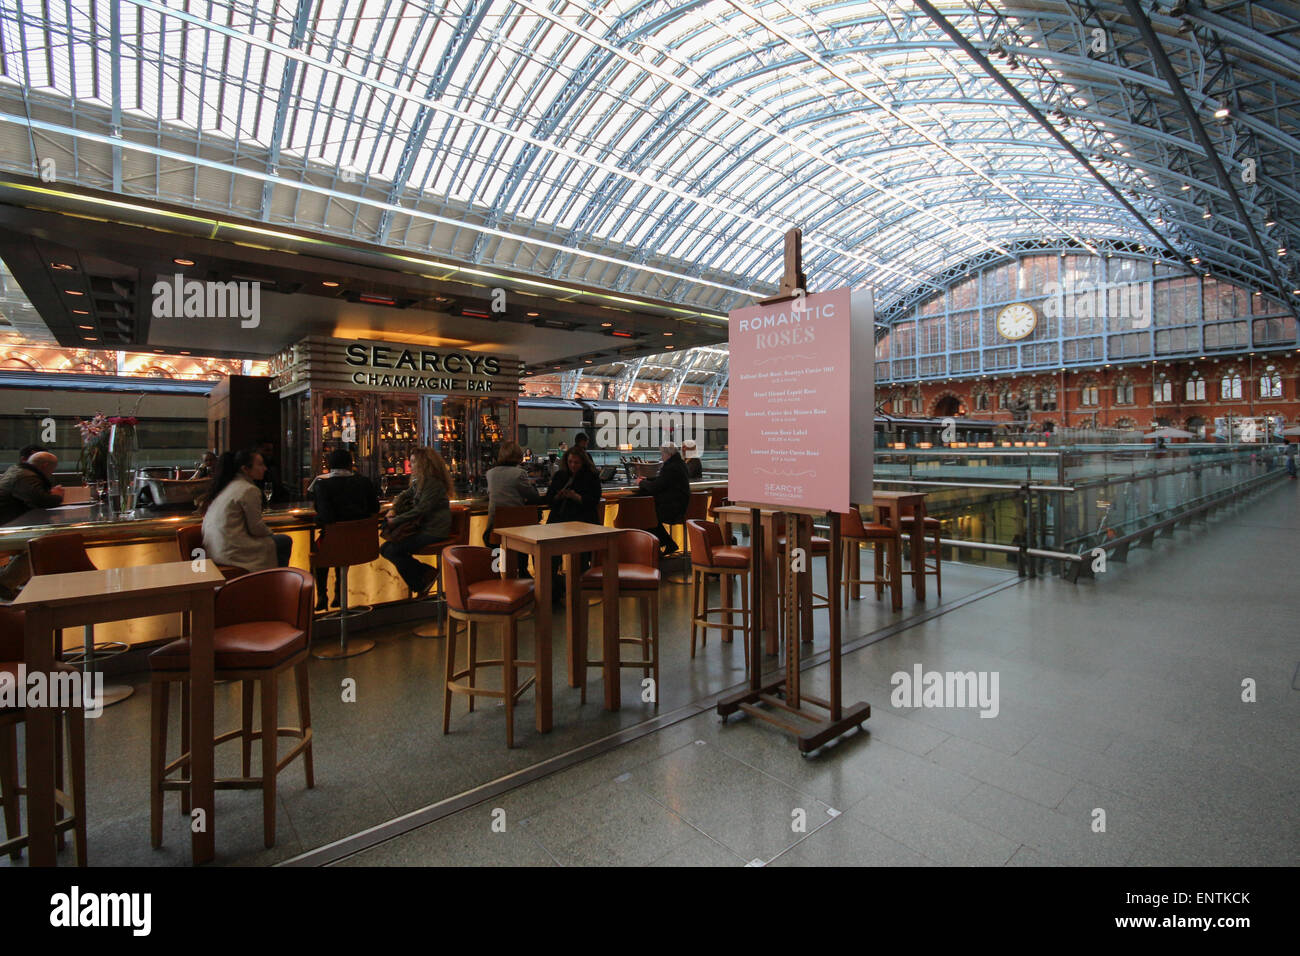 Searcy's Champagne Bar and restaurant in St Pancras International Railway Station London Stock Photo